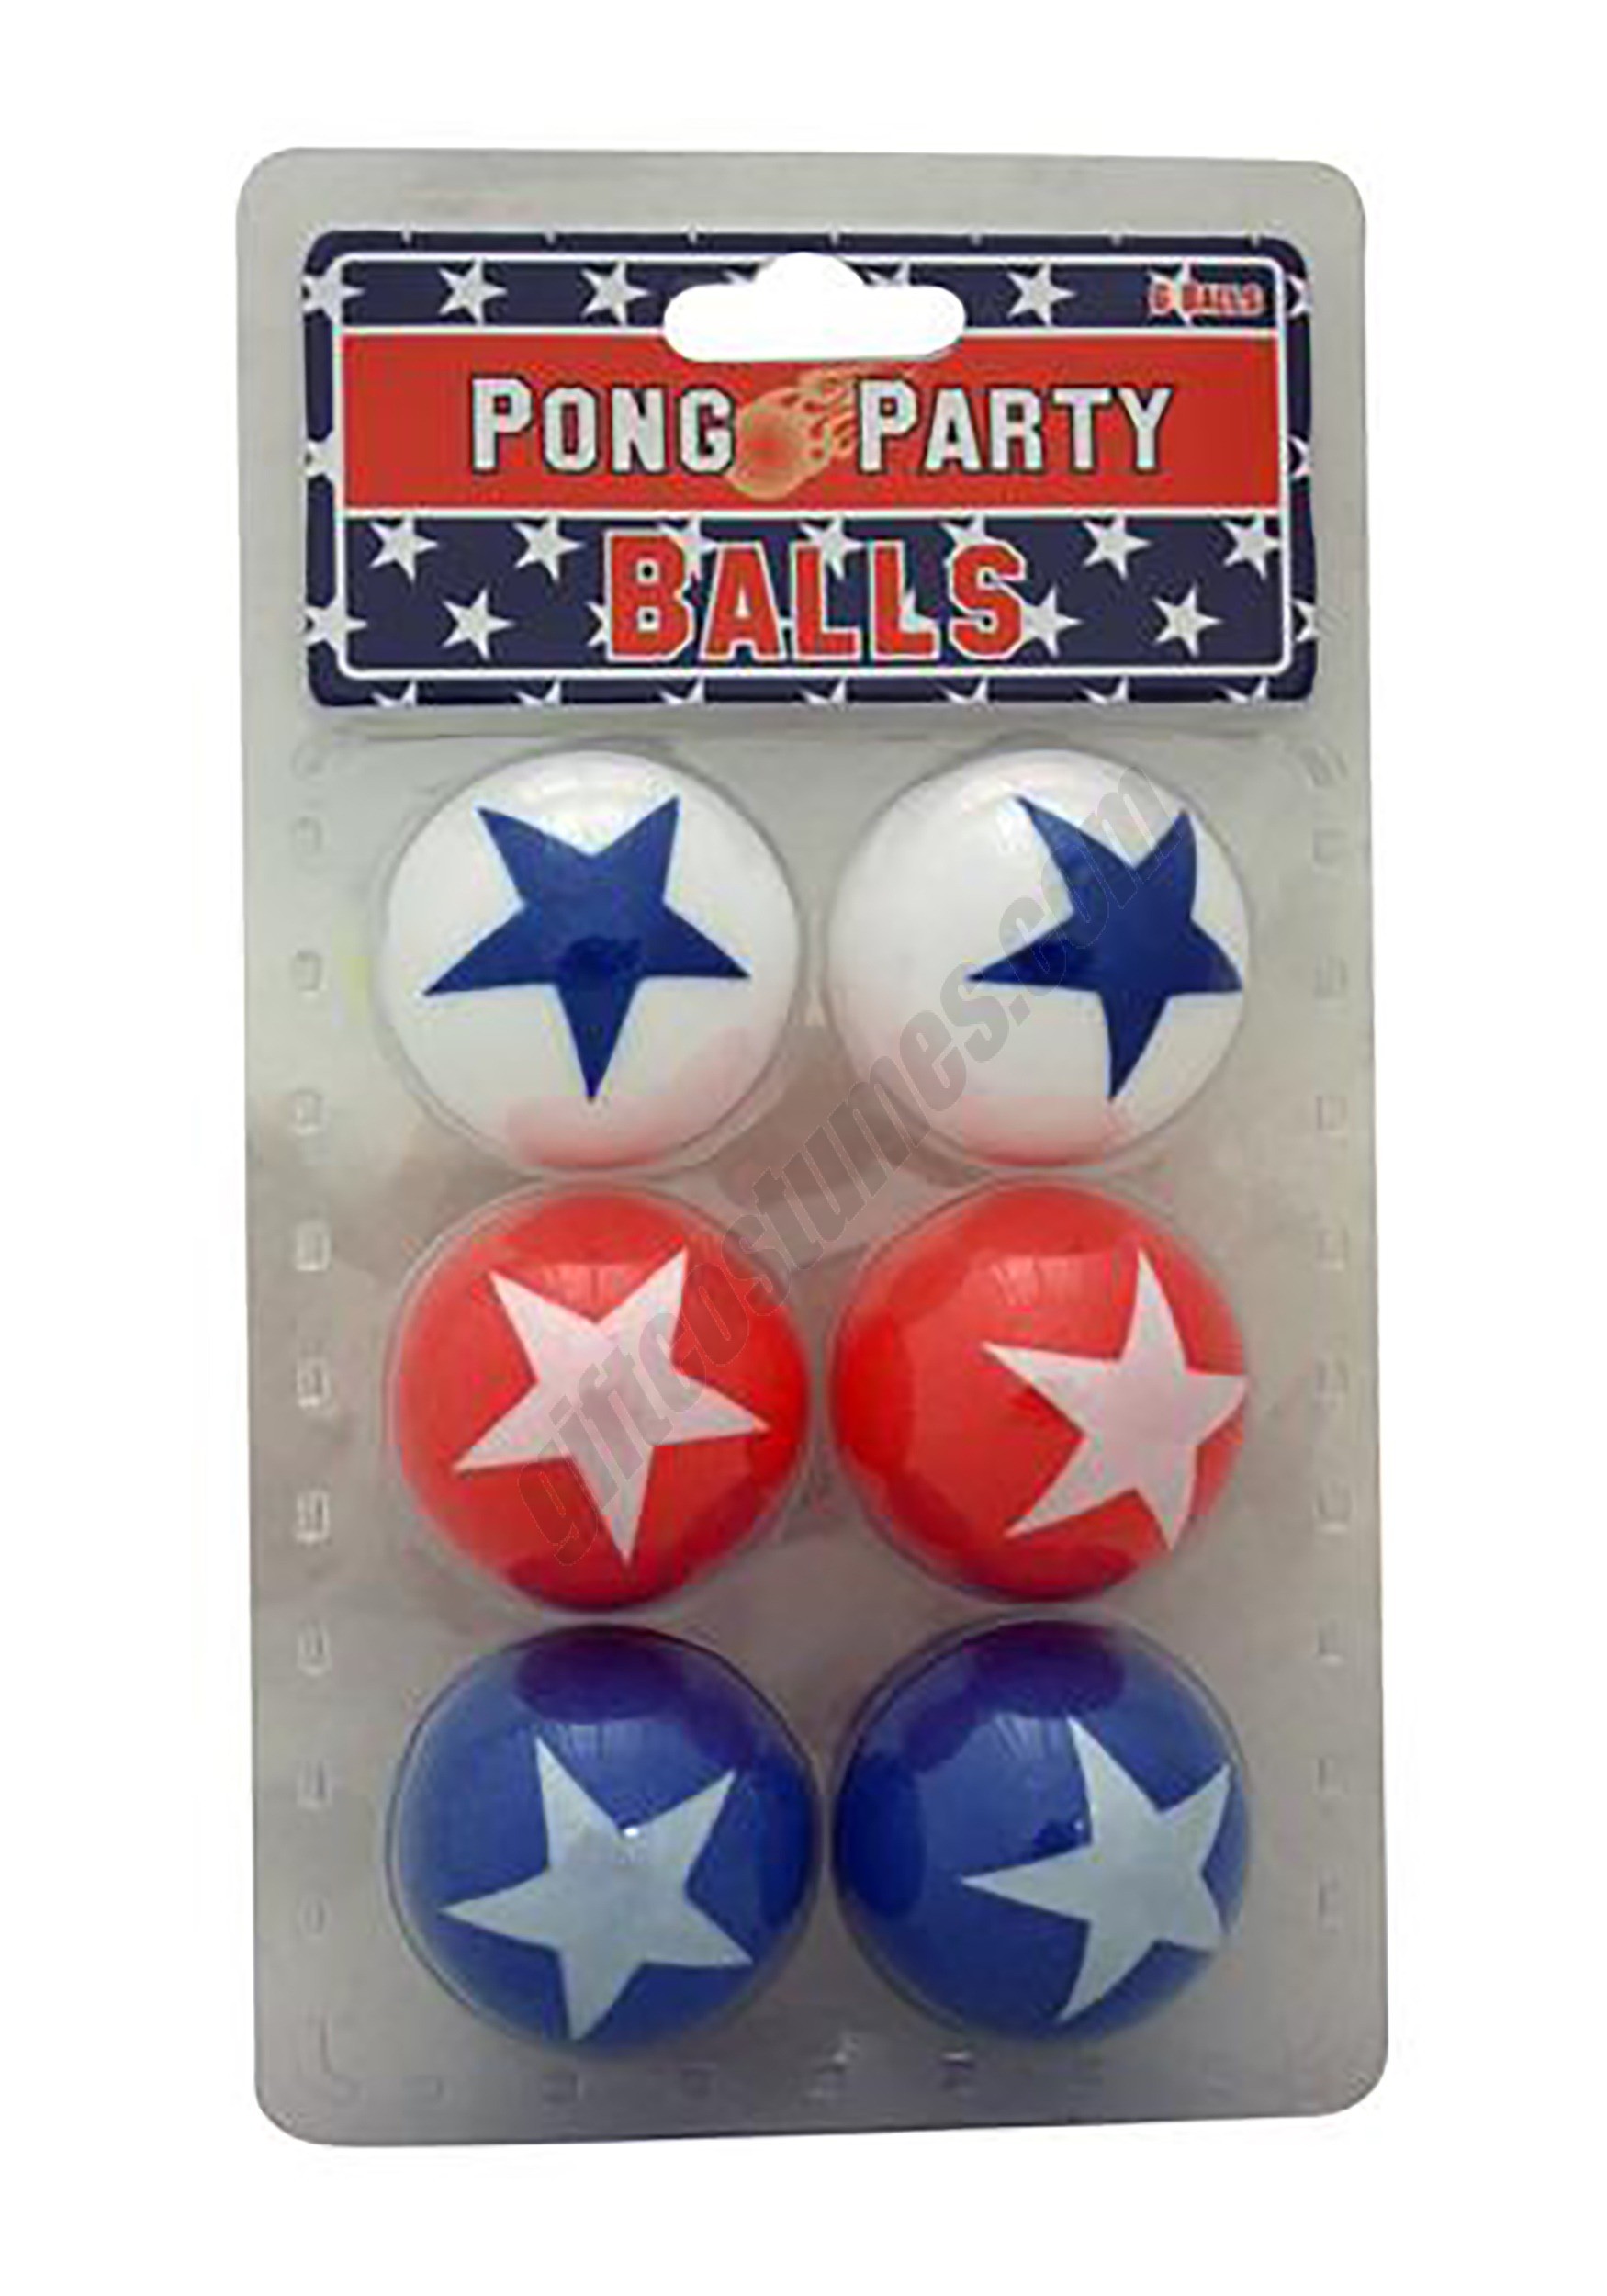 America Stars and Stripes Beer Pong Balls Promotions - America Stars and Stripes Beer Pong Balls Promotions